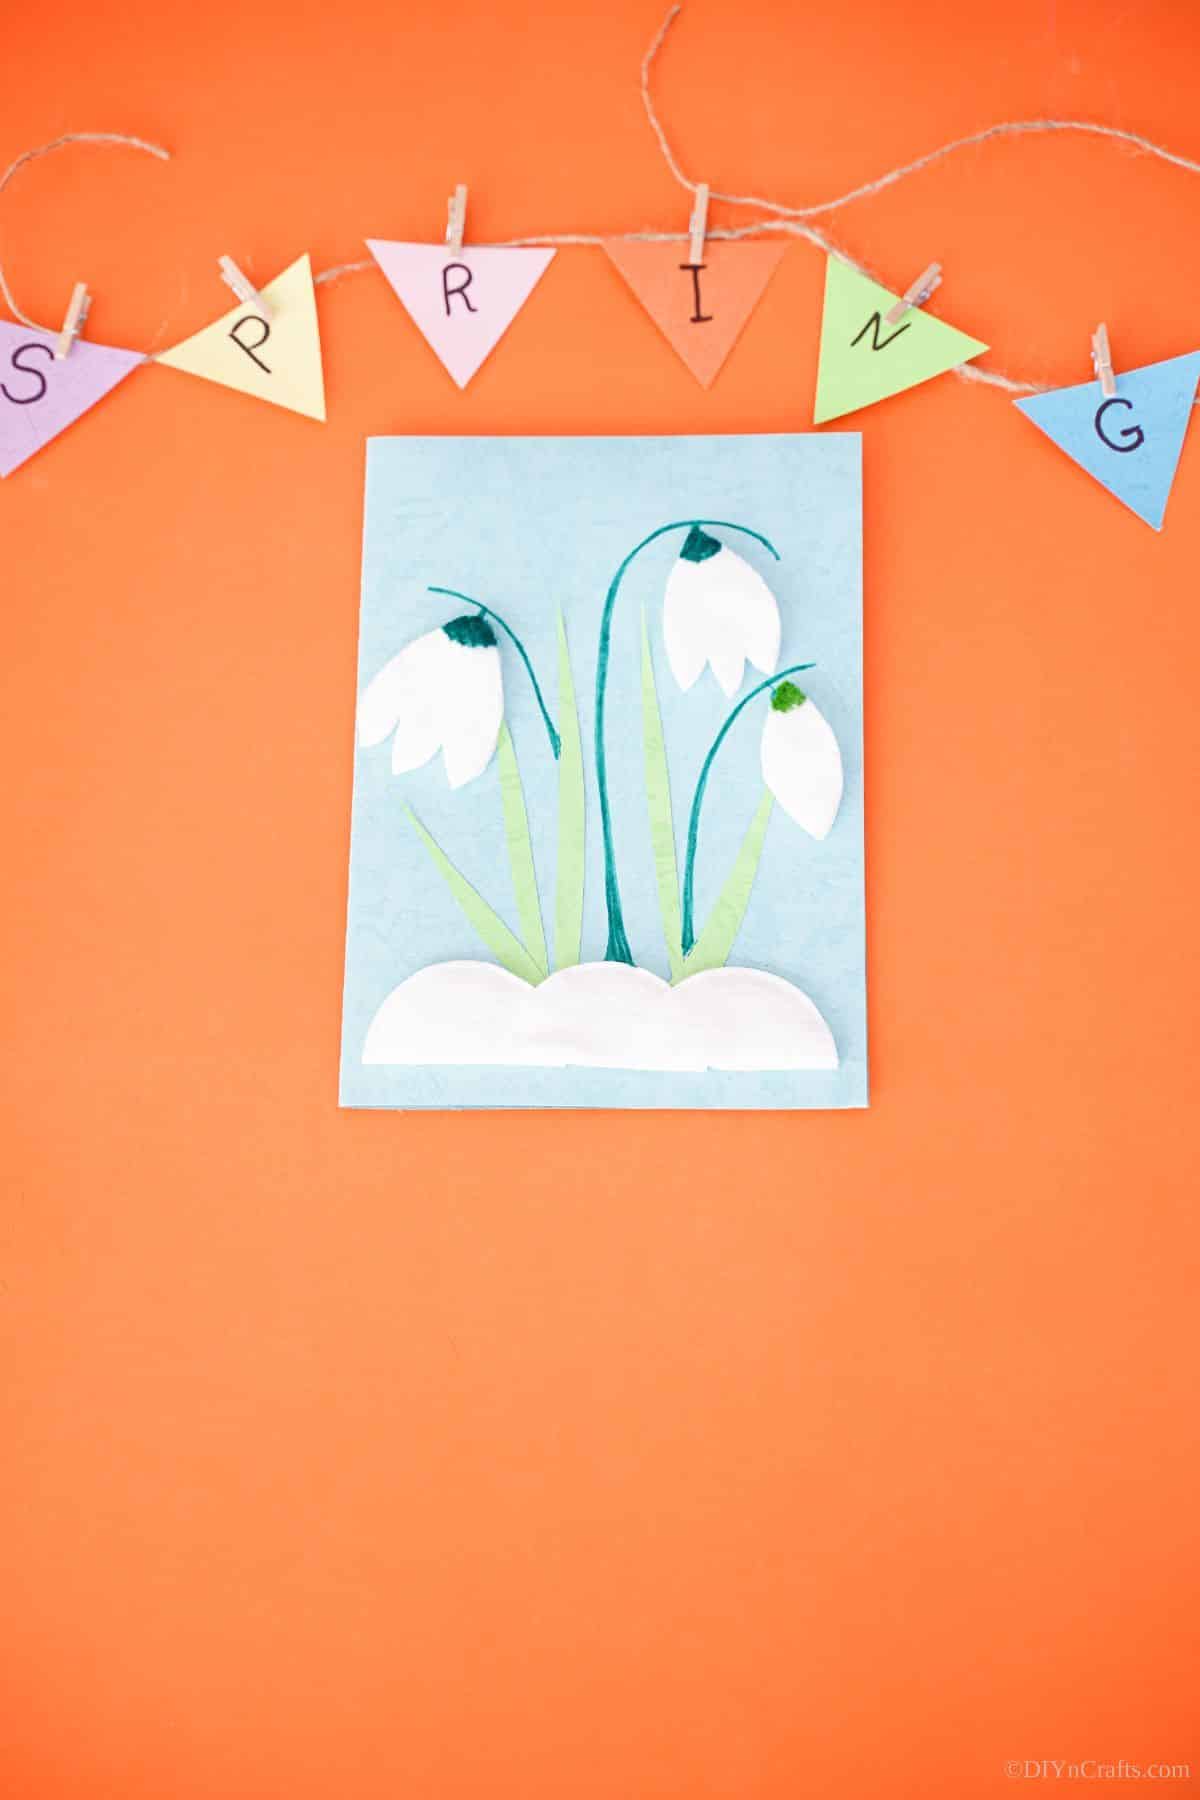 blue tulip handmade card laying on orange paper with spring sign